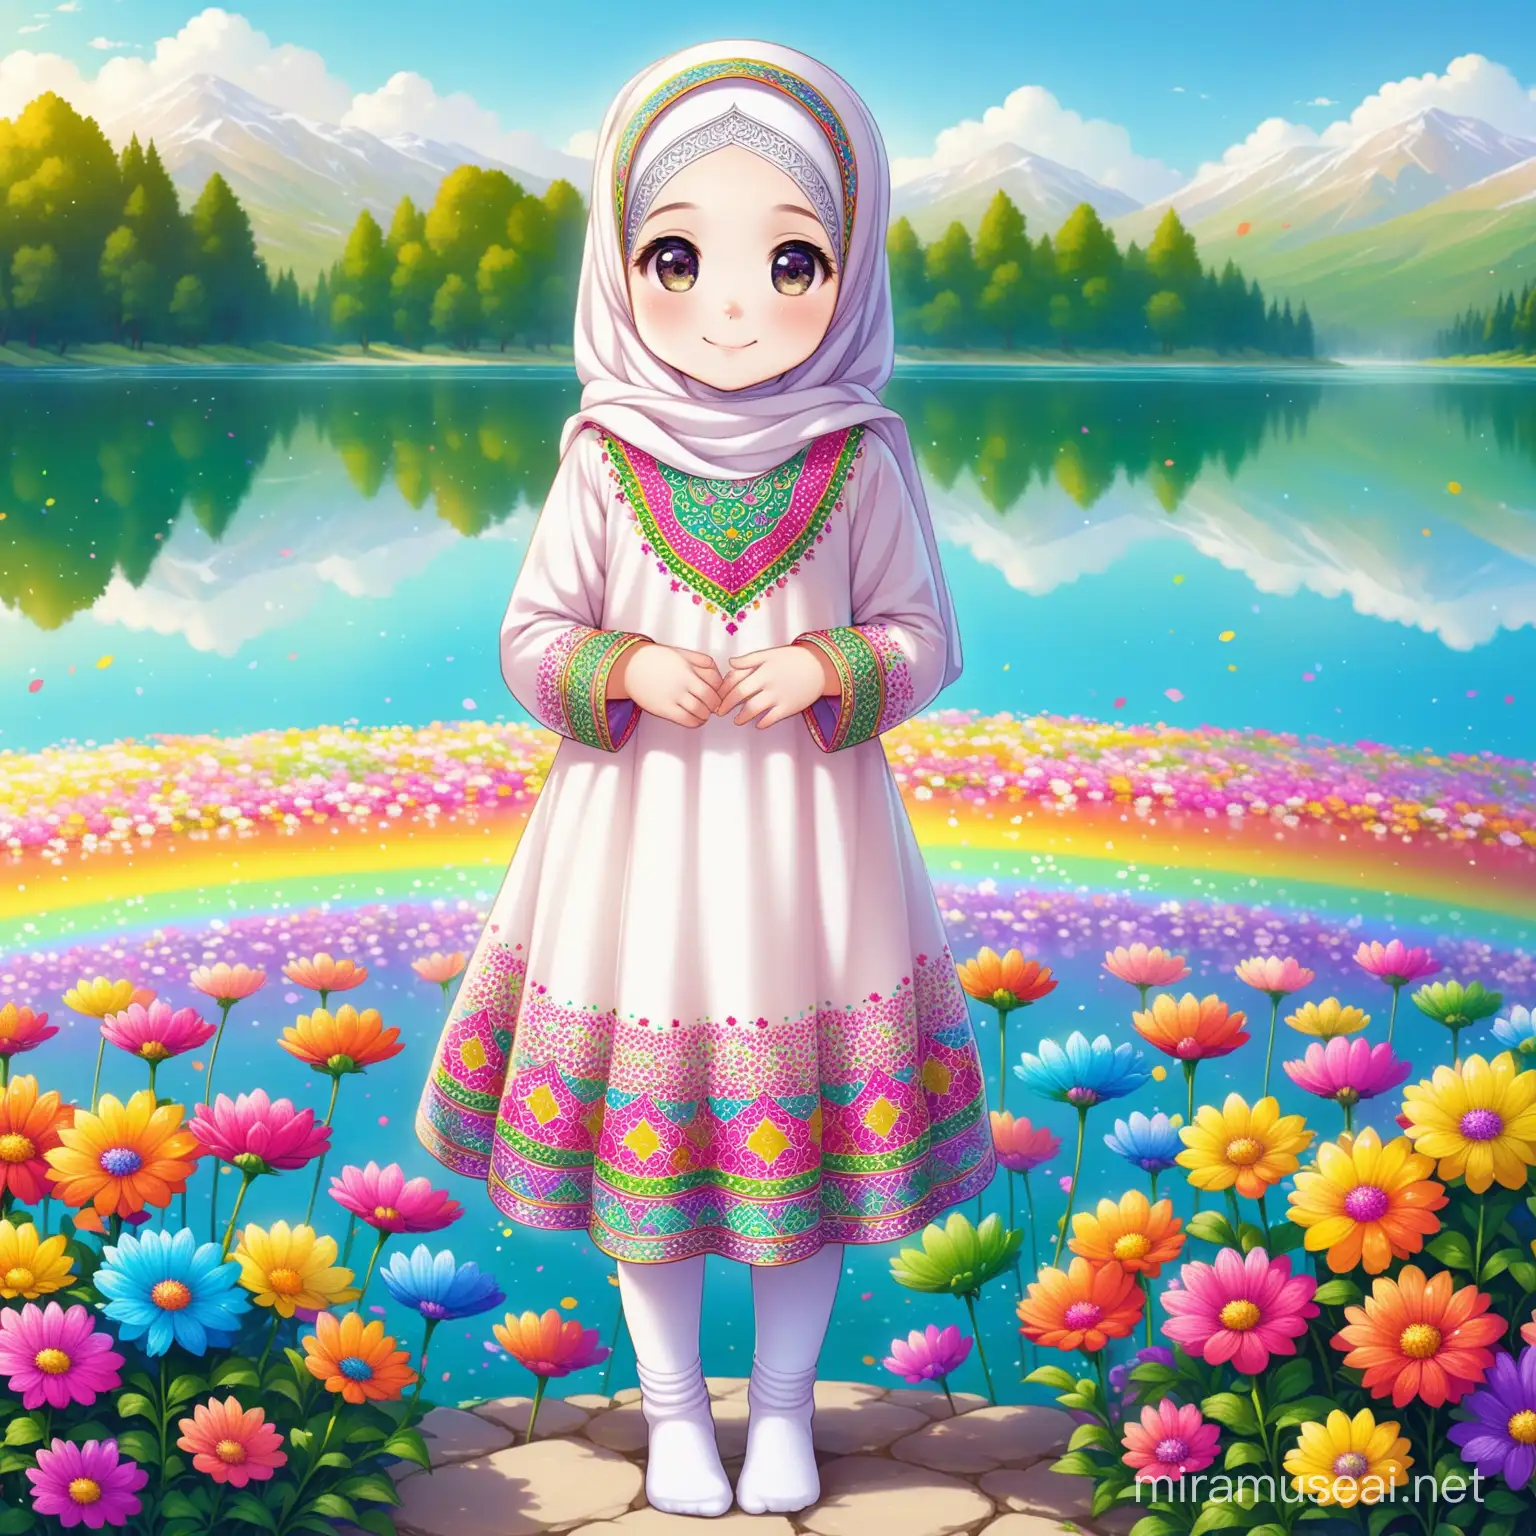 Smiling Persian Girl in Traditional Attire Surrounded by Rainbow Flowers near a Lake